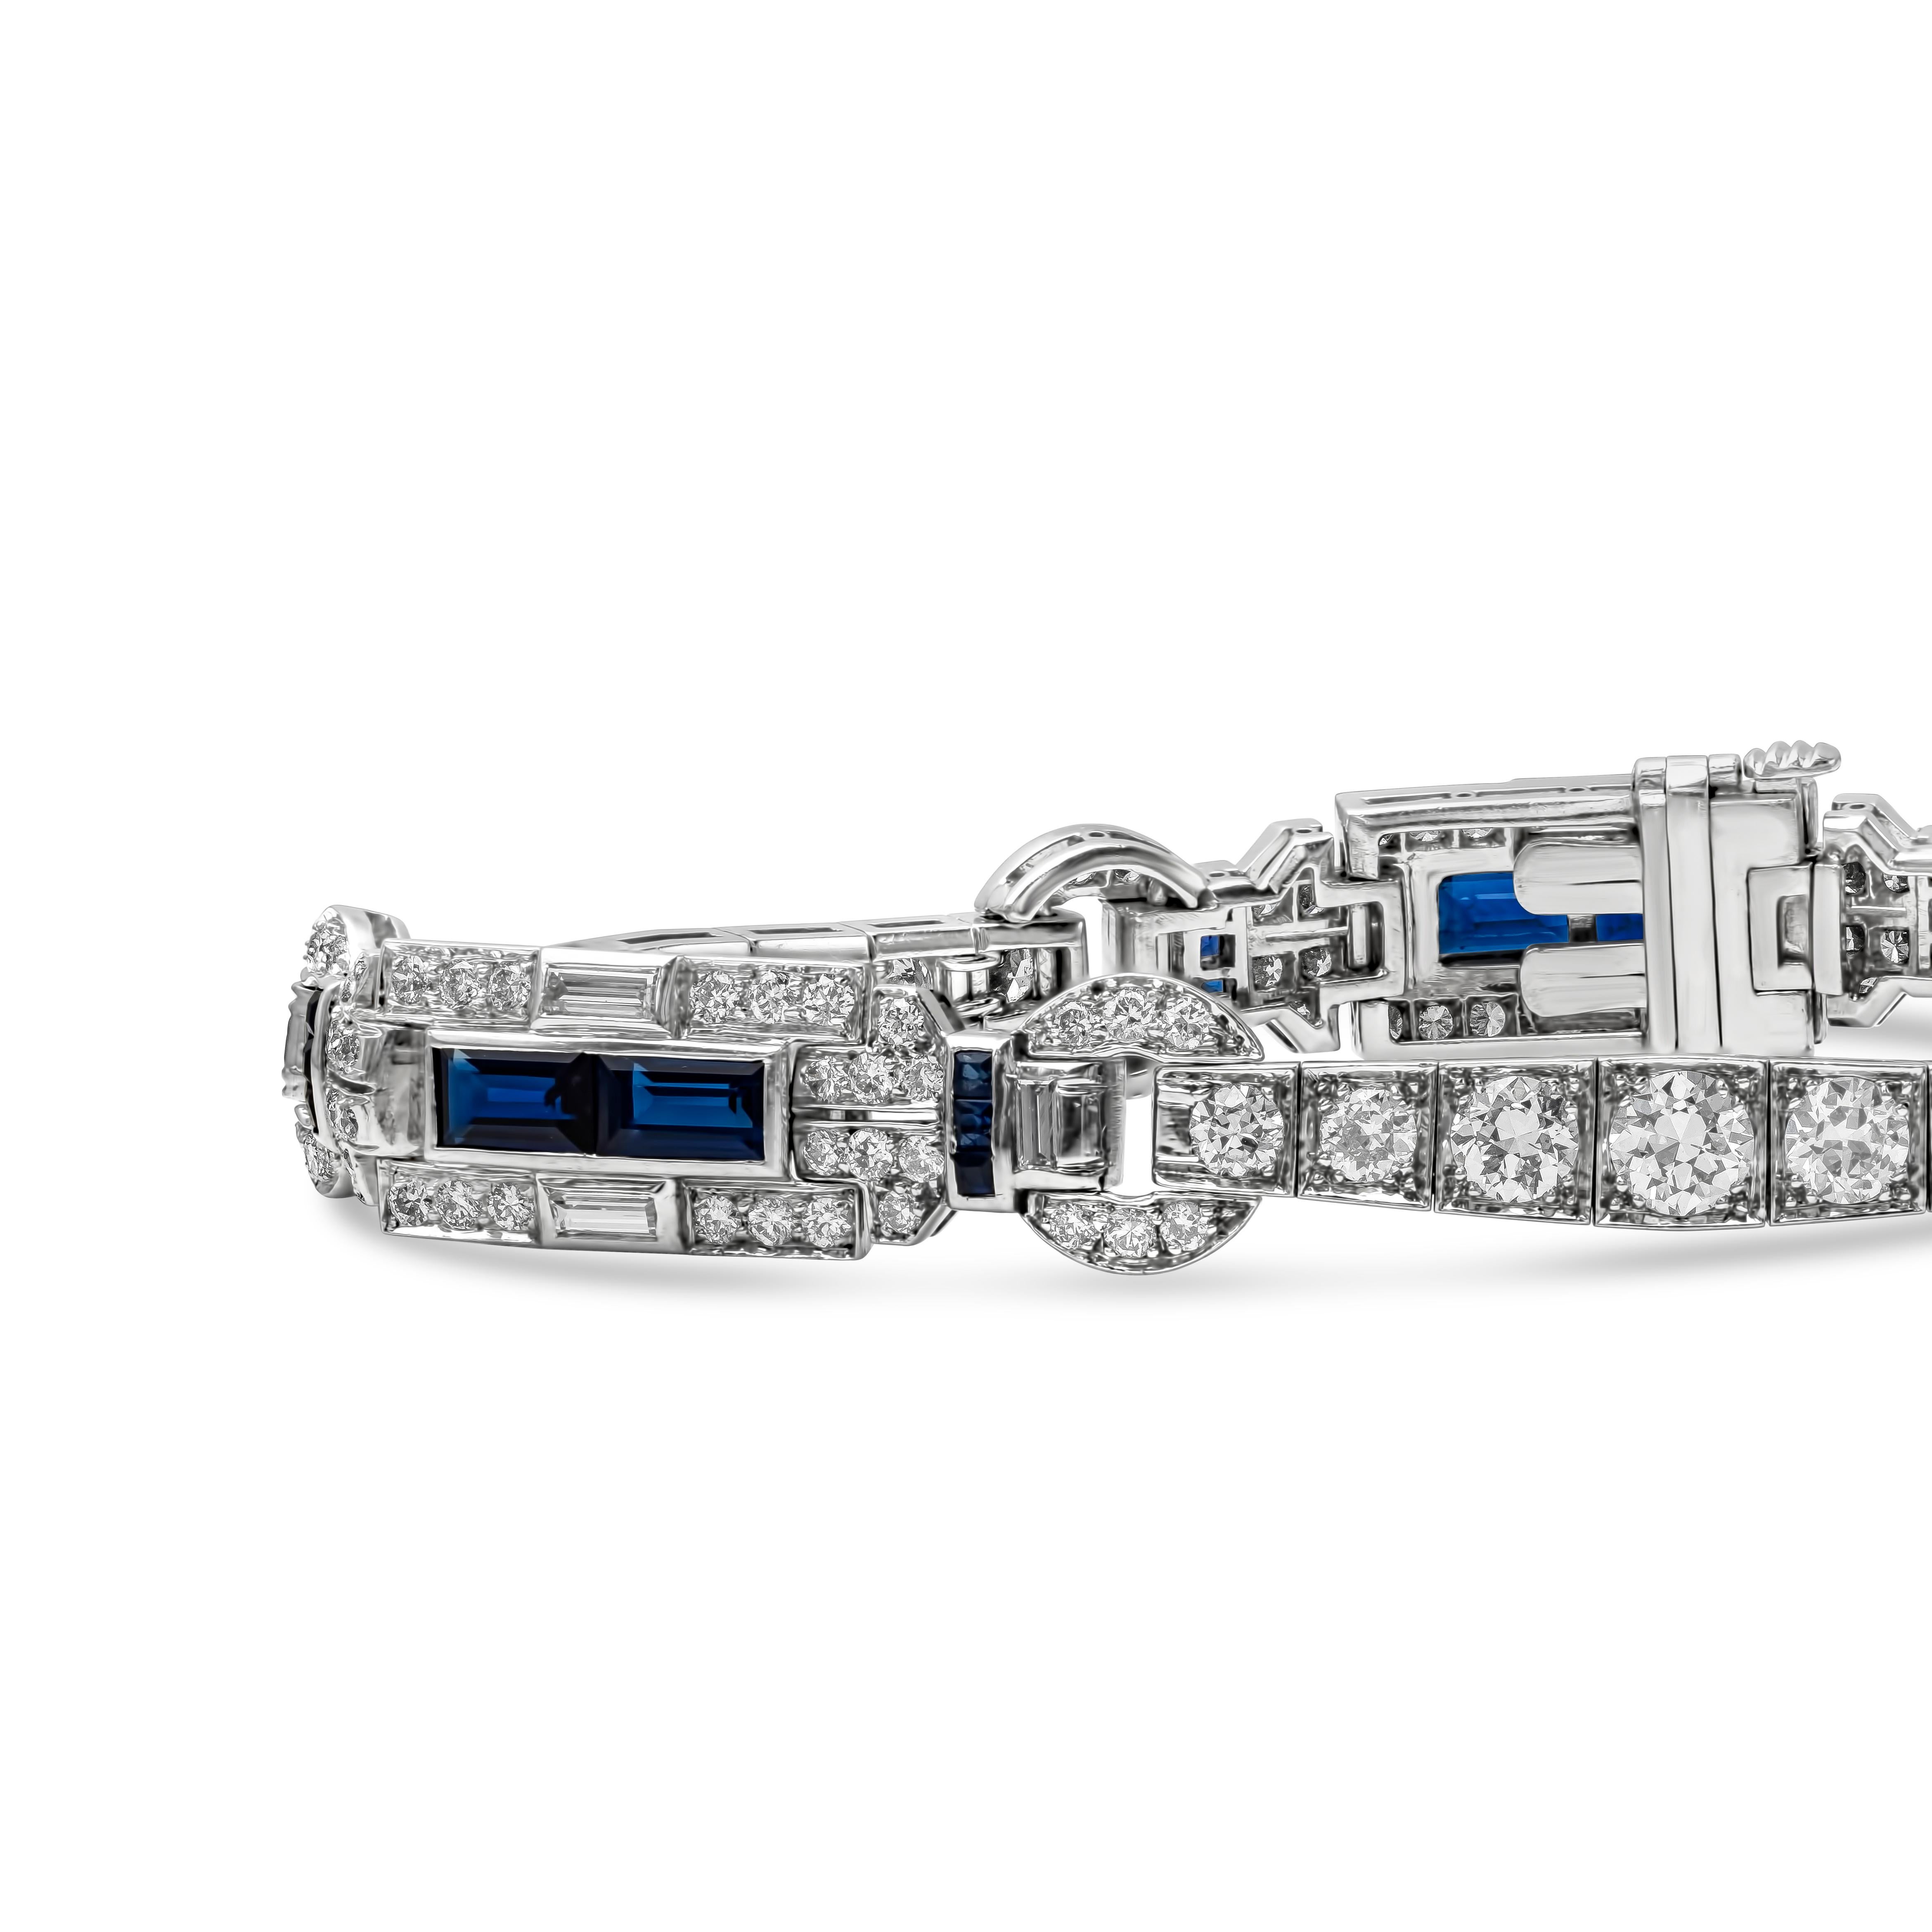 A beautiful and unique antique bracelet showcasing Old European cut diamonds weighing 4.25 carats total, set in an intricately-designed mounting. The bracelet is accented by emerald cut blue sapphires weighing 1.50 carats total. Made in platinum.